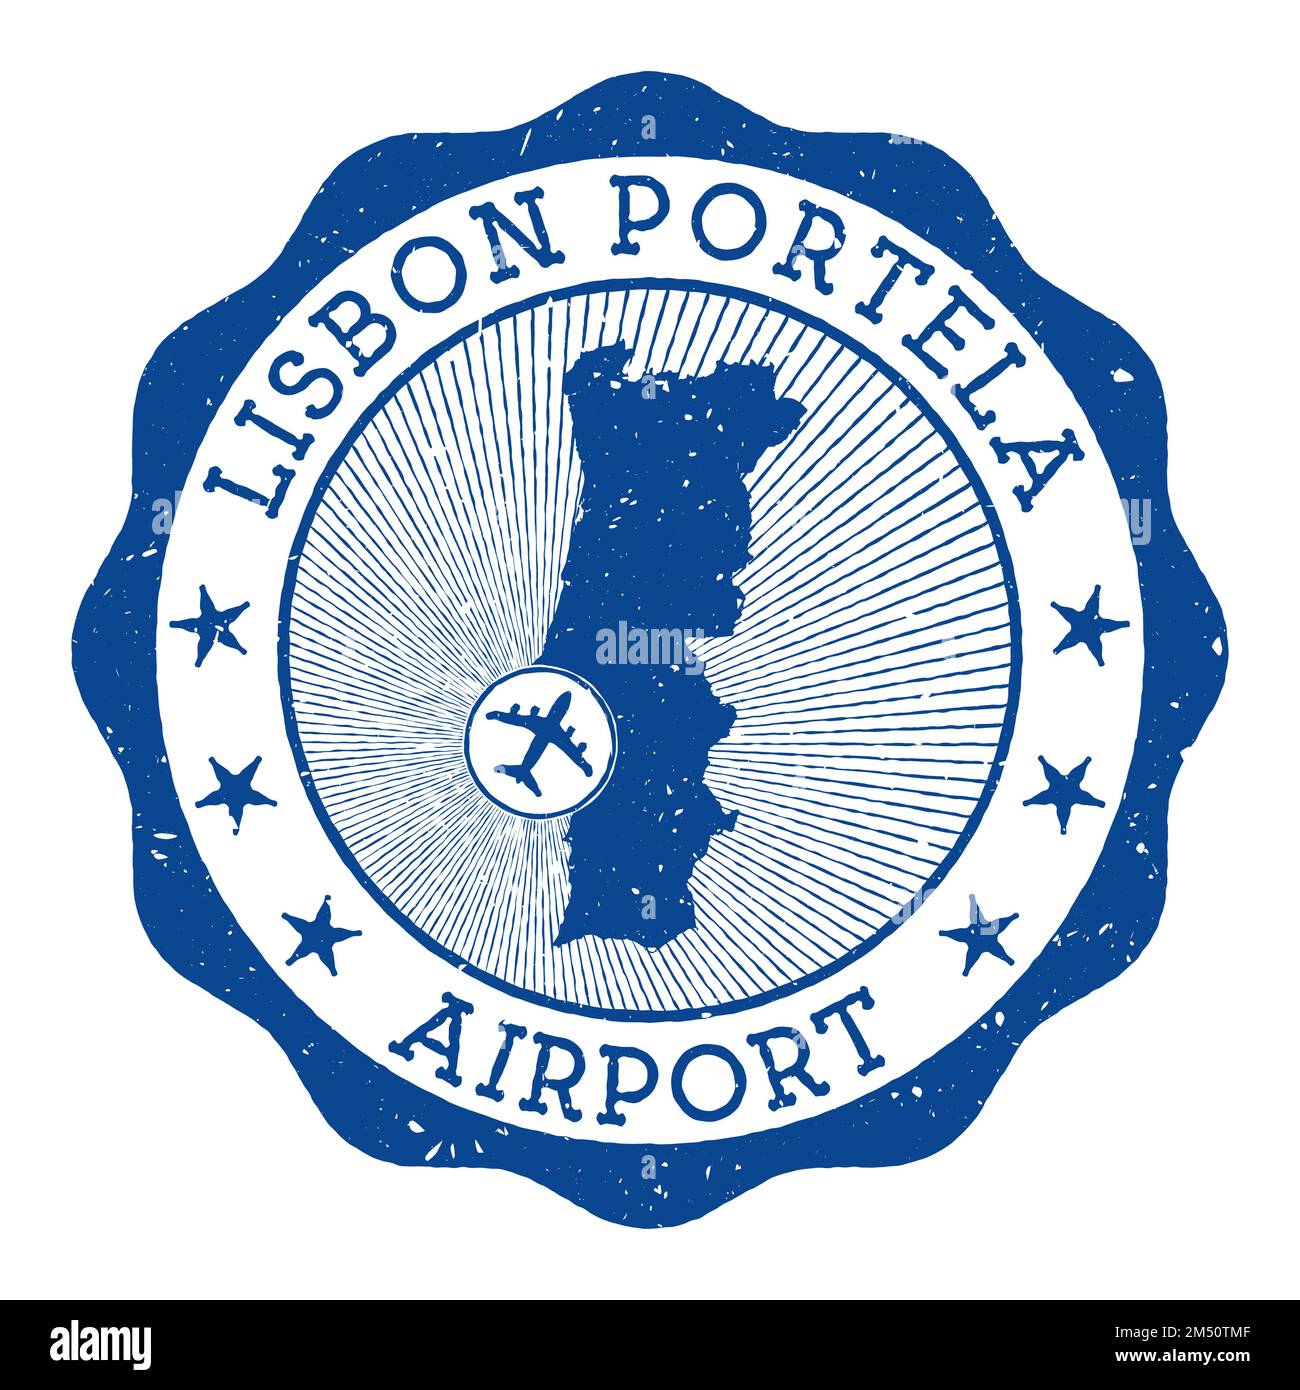 Lisbon Portela Airport stamp. Airport of Lisbon round logo with location on Portugal map marked by airplane. Vector illustration. Stock Vector